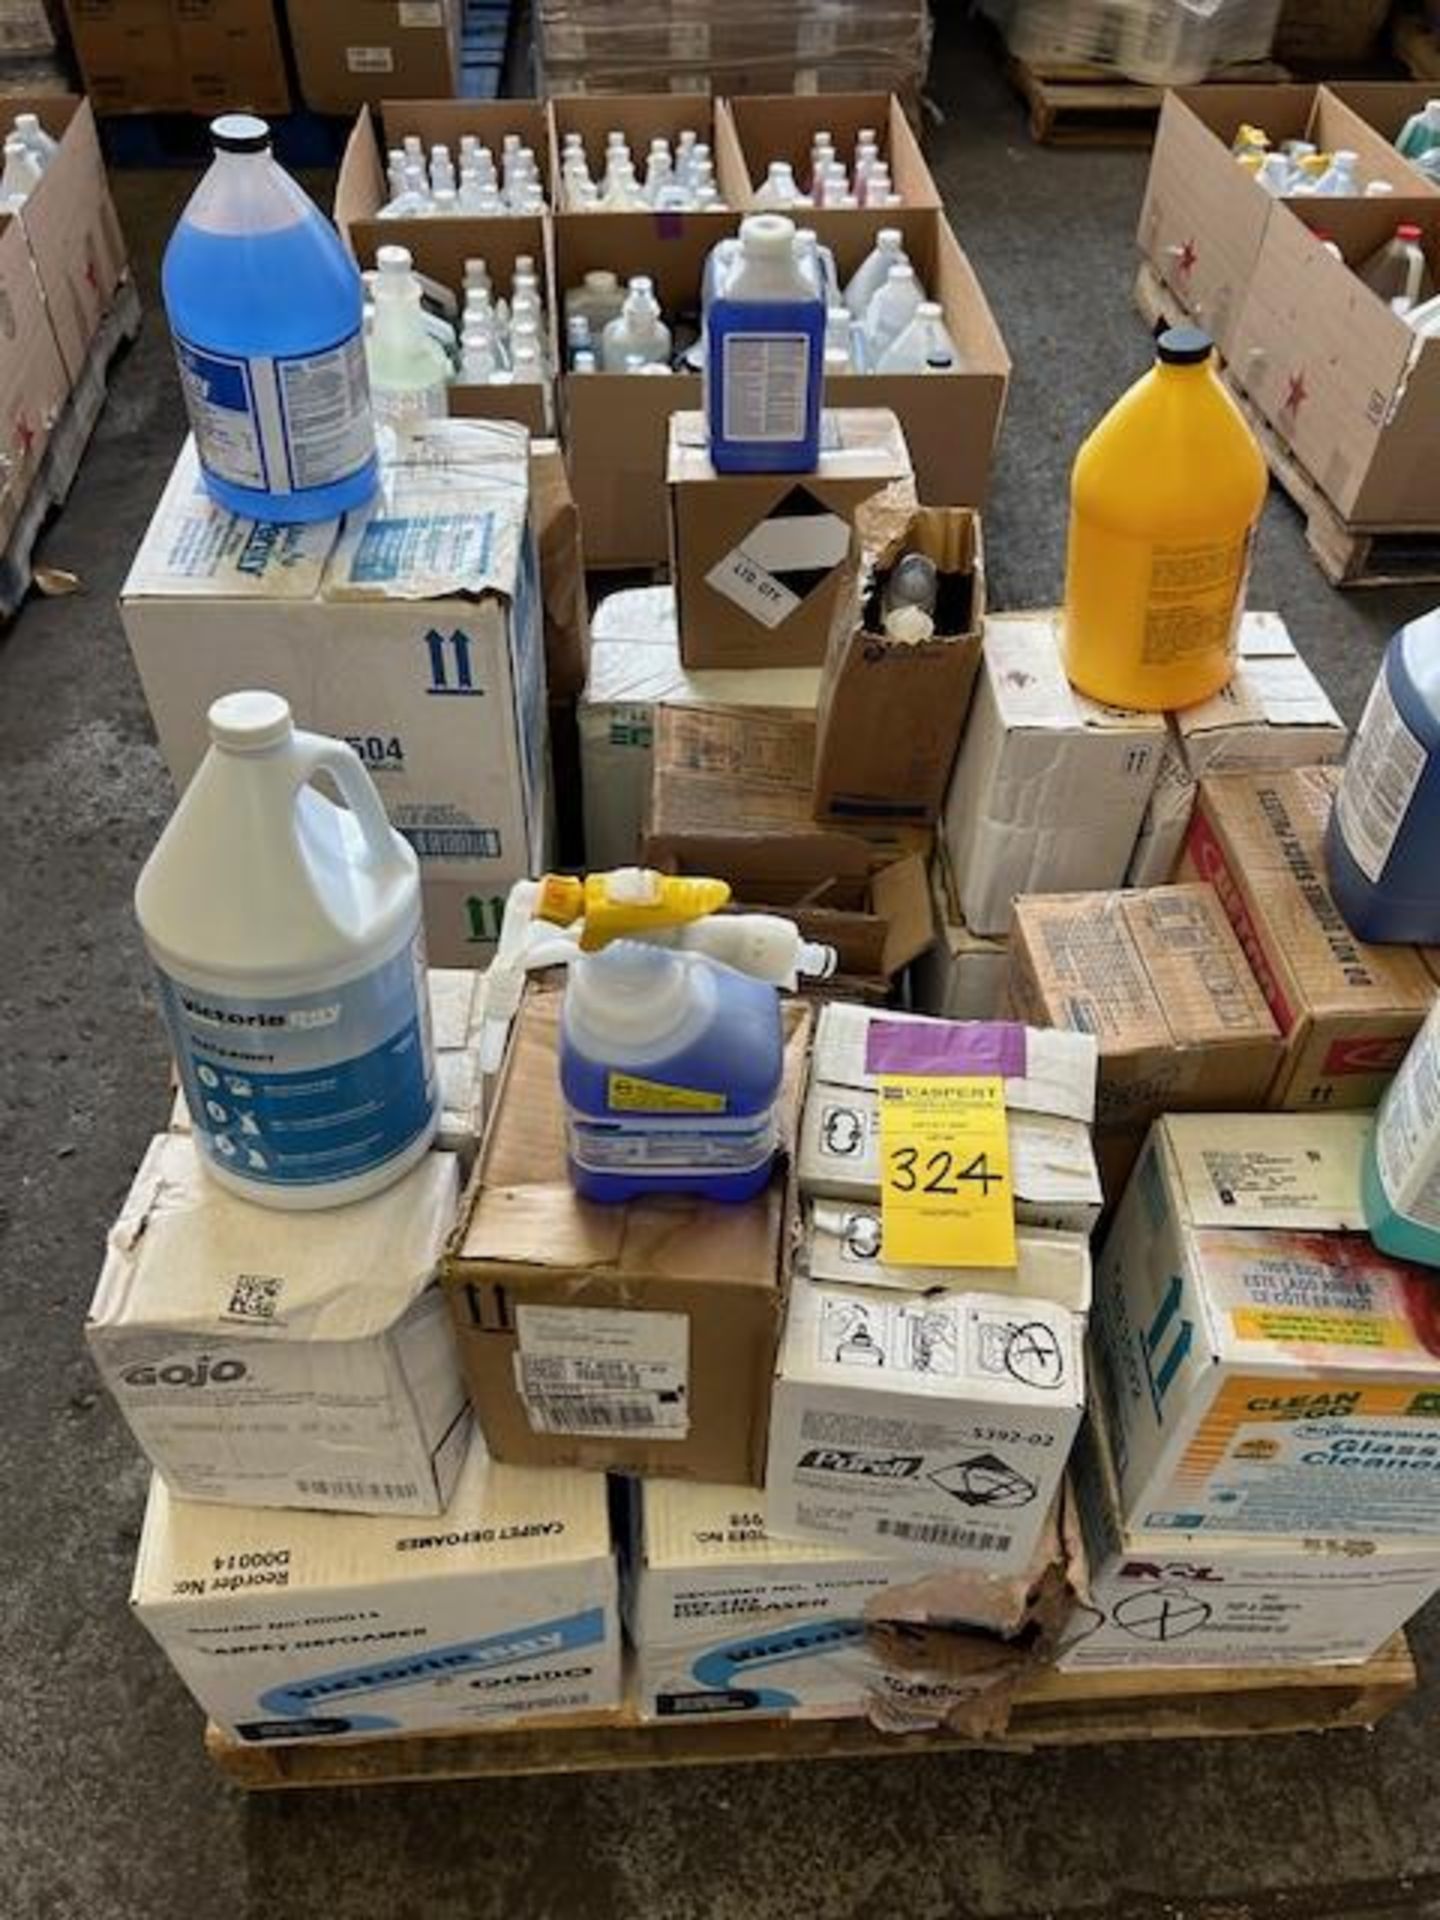 LOT - Assorted Chemicals (Approx 33 Cases) - Image 4 of 6